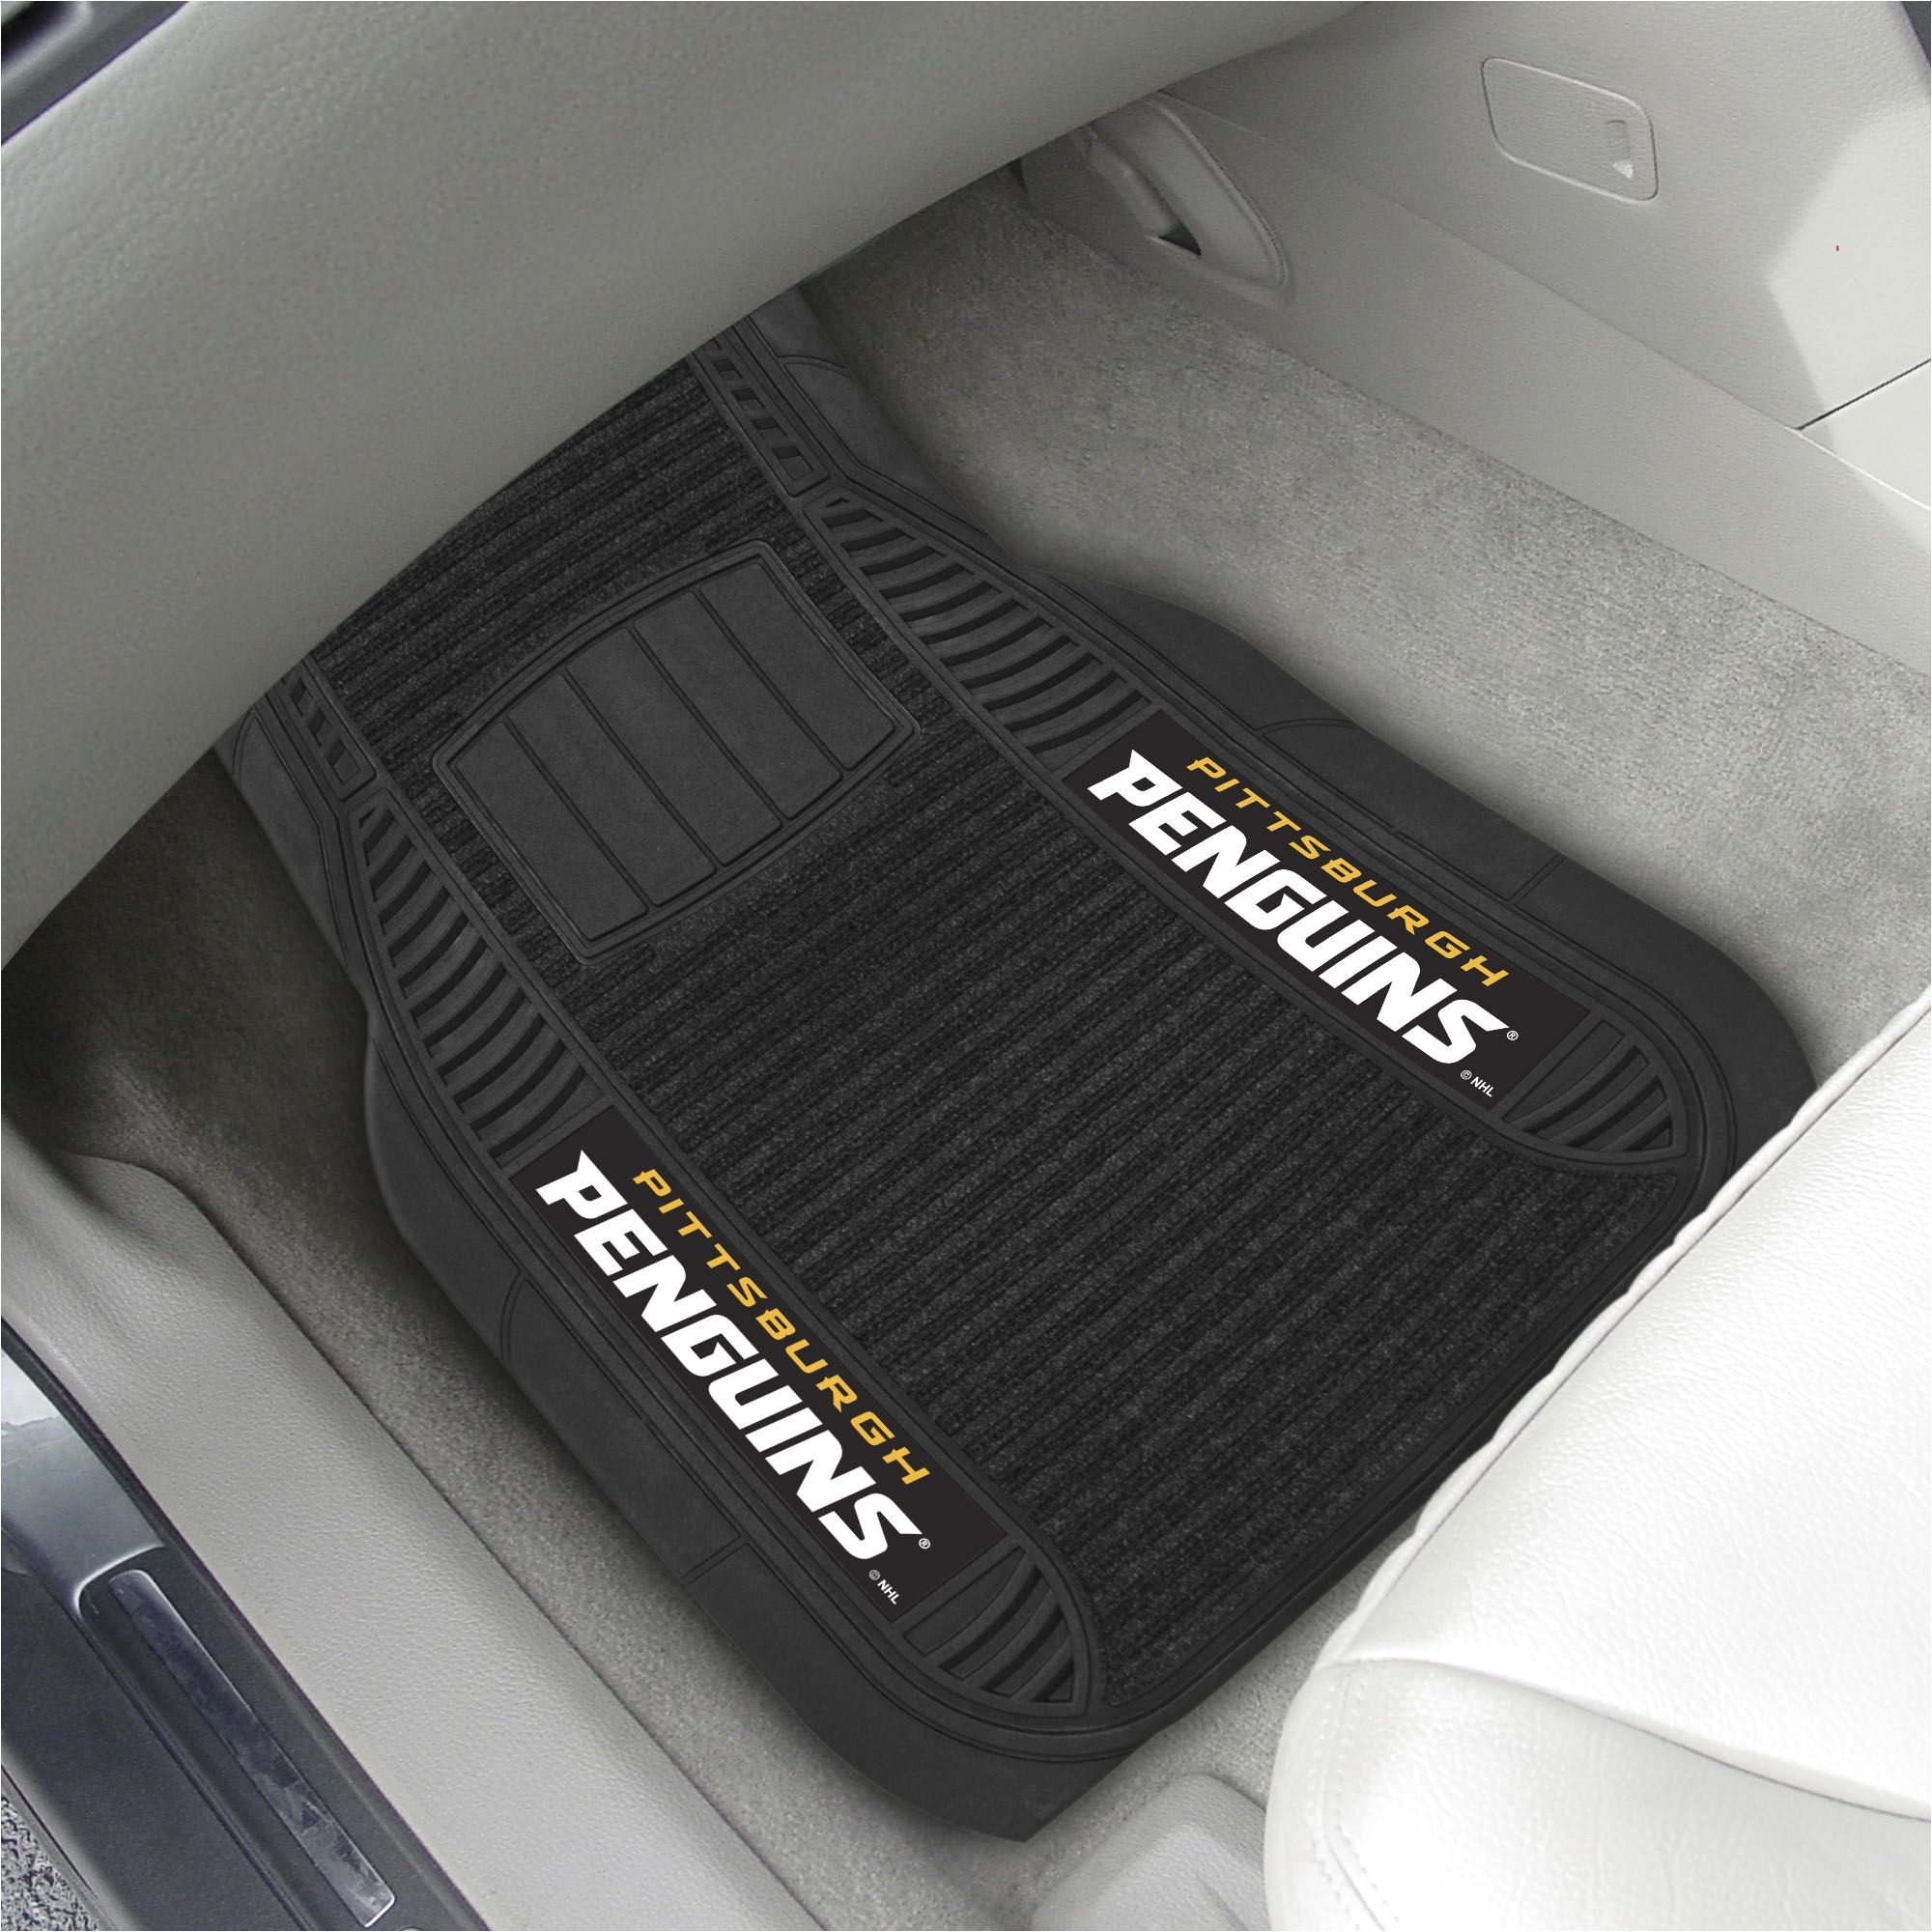 ncaa officially licensed vanderbilt university deluxe mat deluxe car mats are perfect for anyone who is serious about their ride and team pride